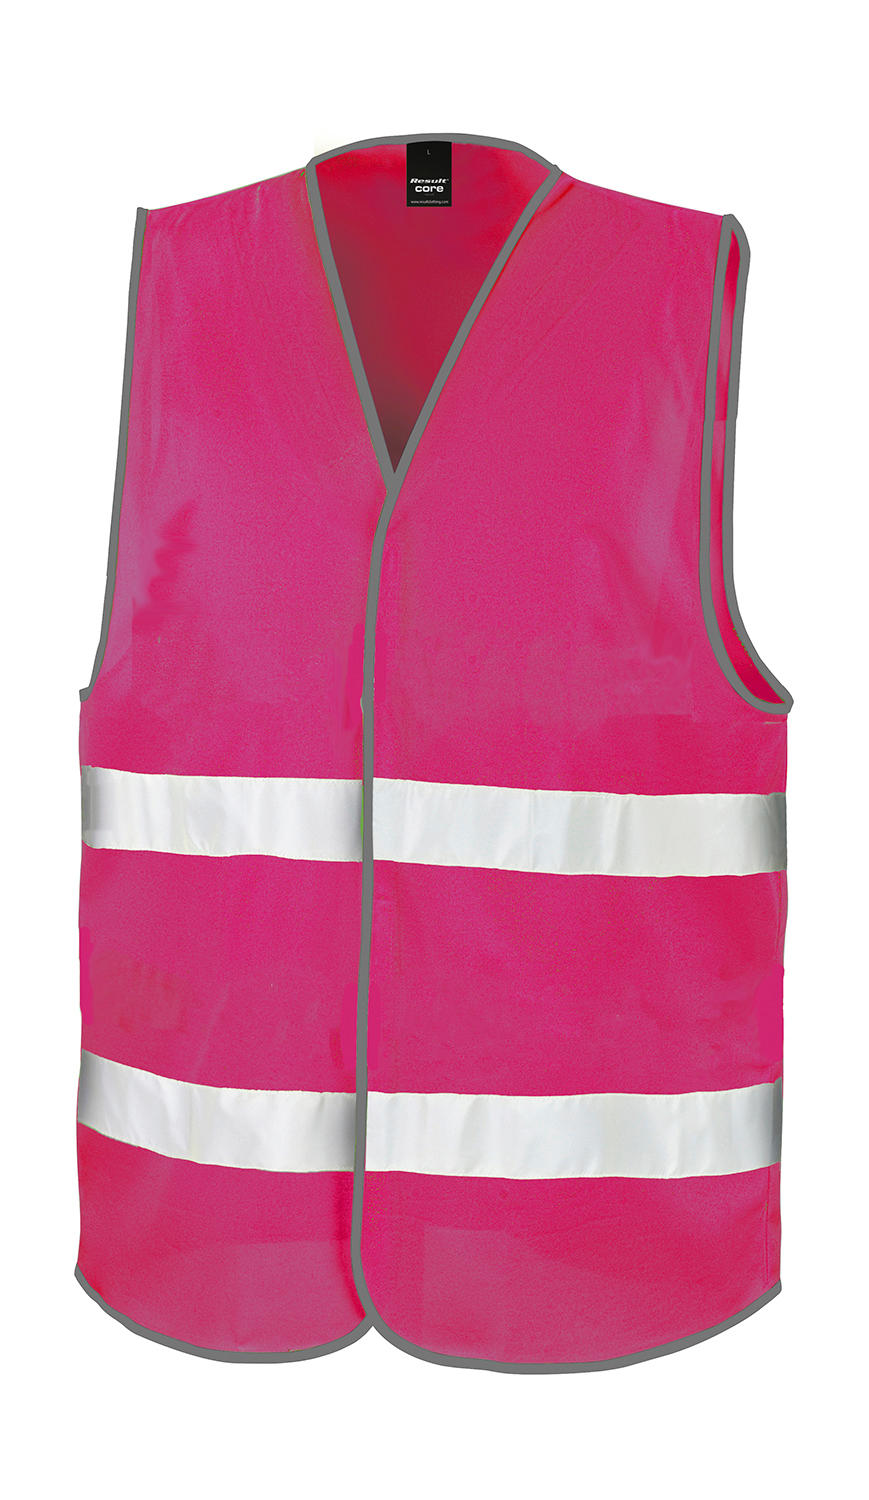  Core Enhanced Visibility Vest in Farbe Raspberry